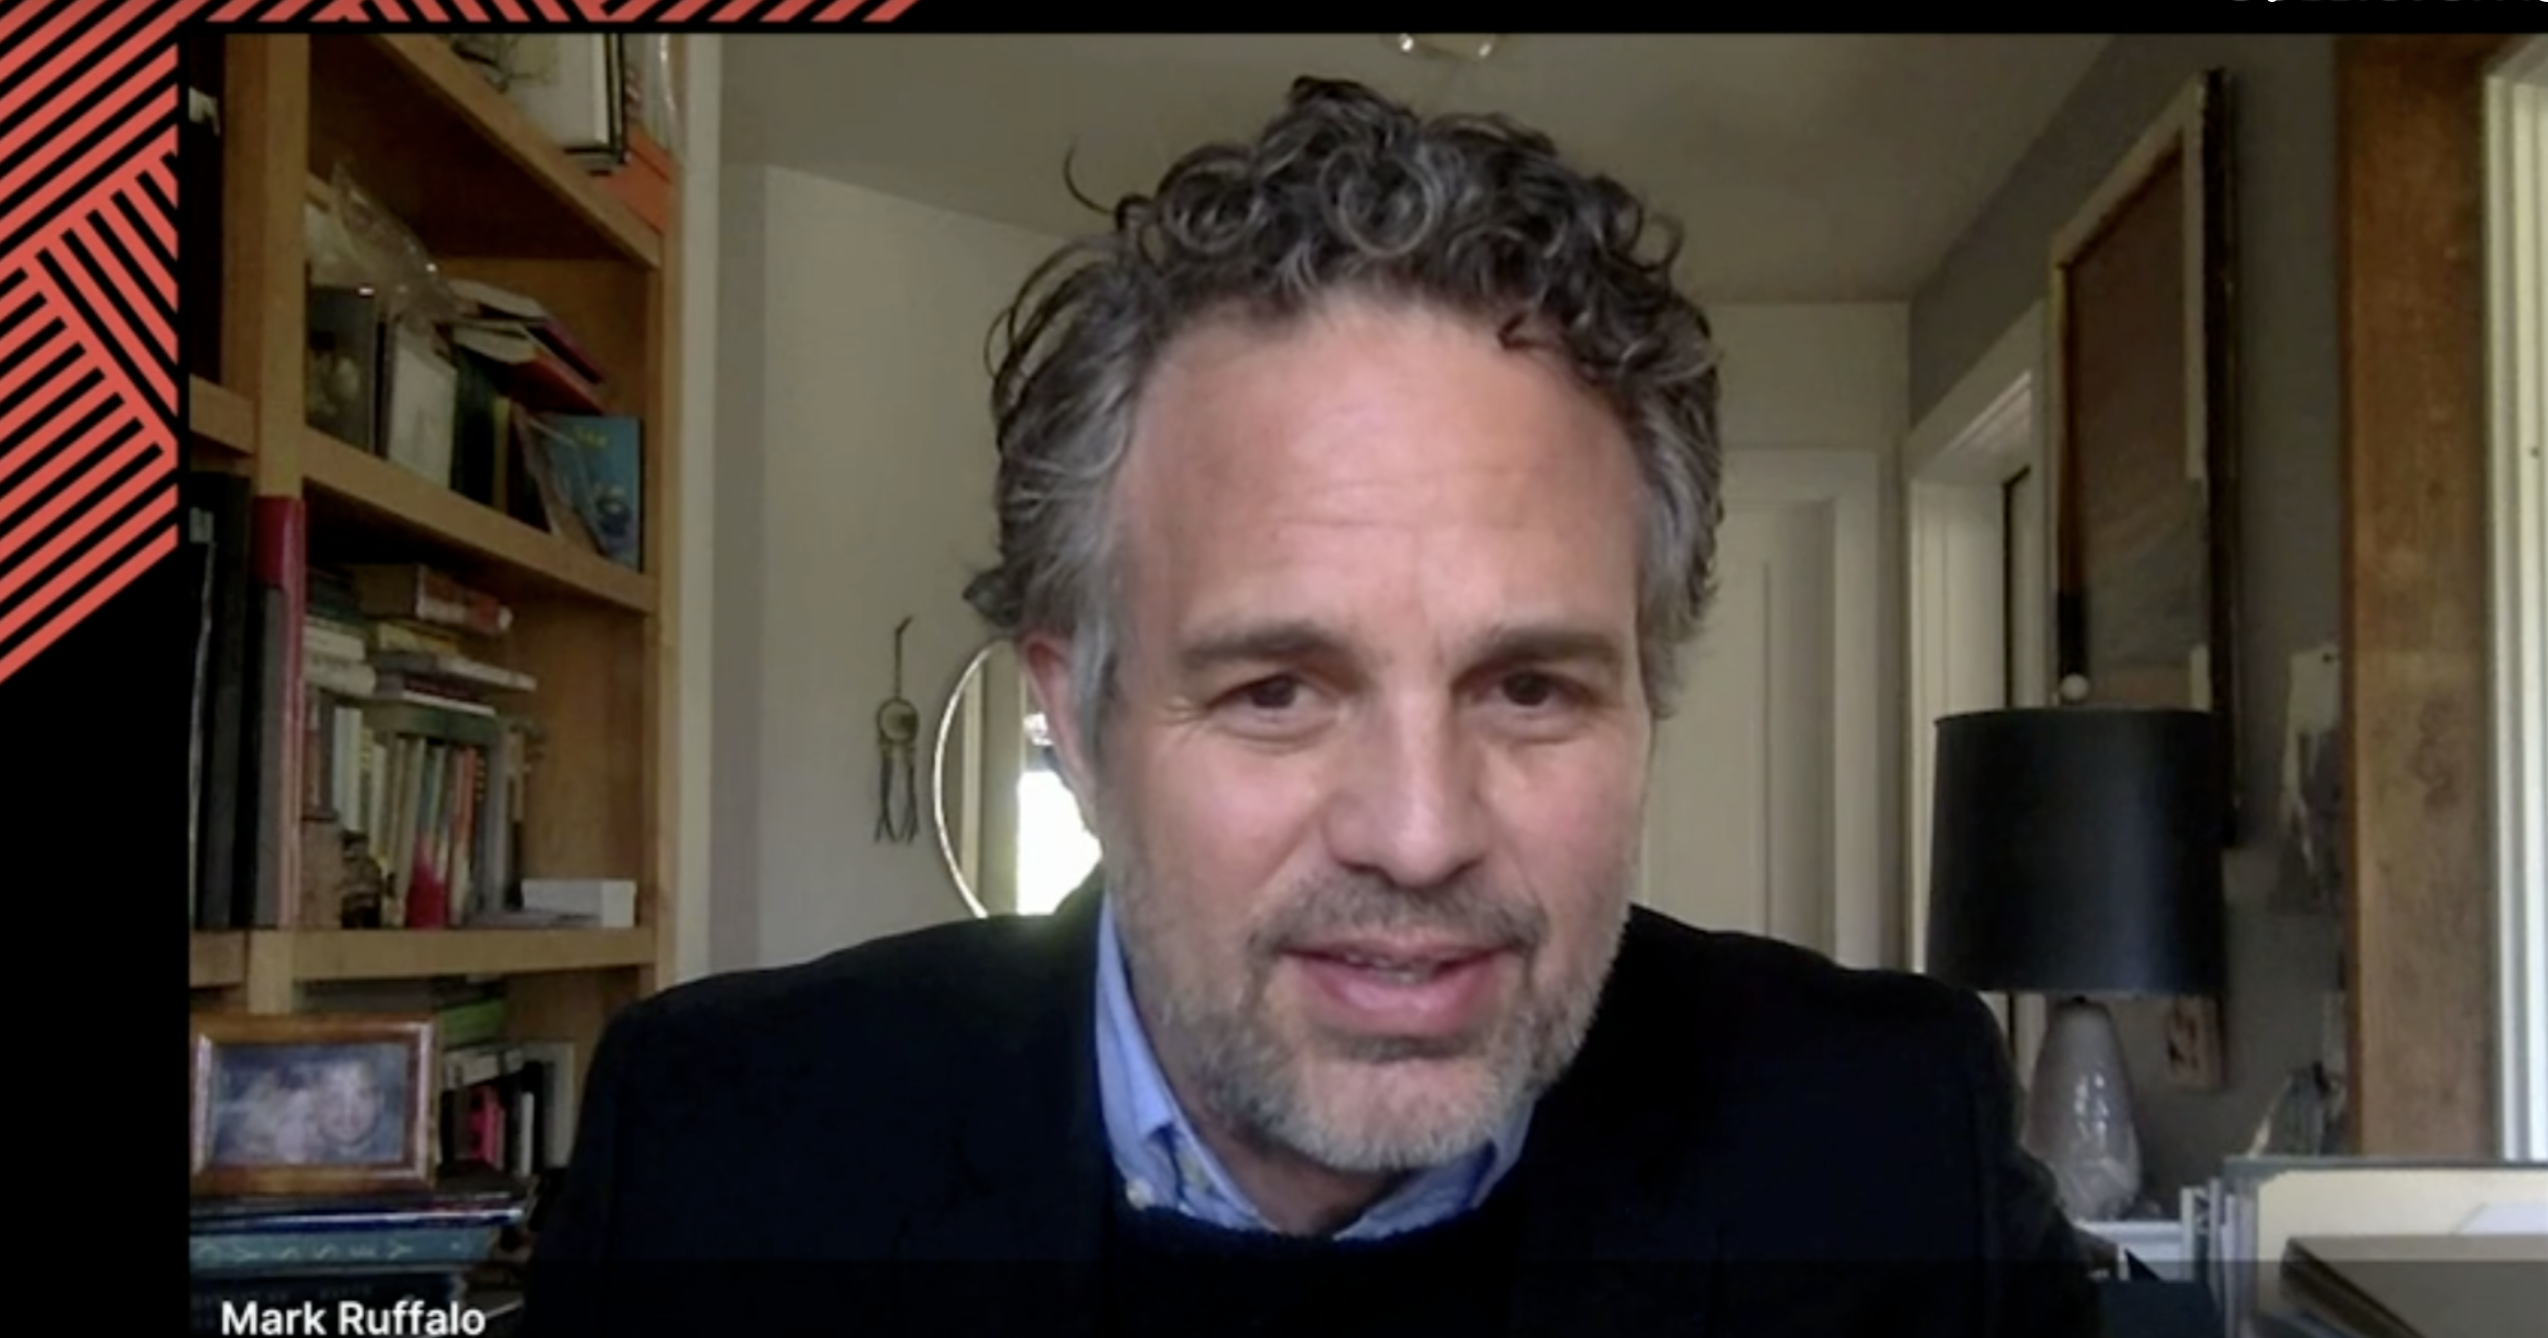 Mark Ruffalo: ‘Our institutions in the US are racially biased’